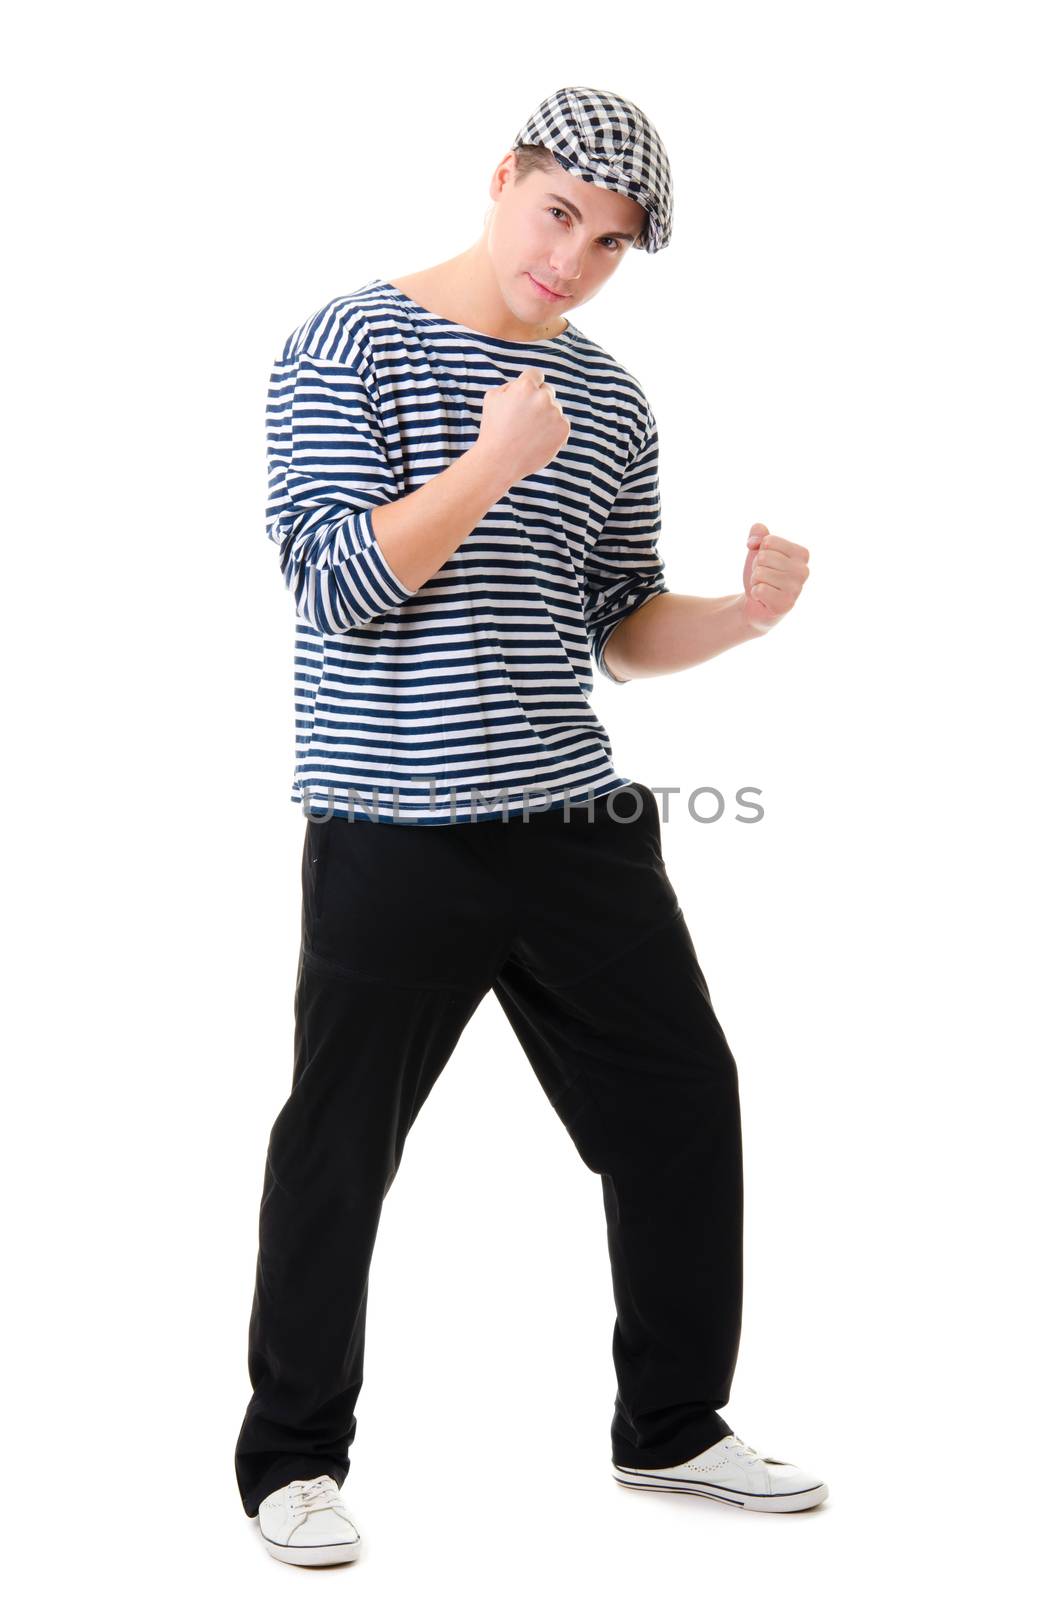 Look naughty and combat young man in stylish striped dress and cap